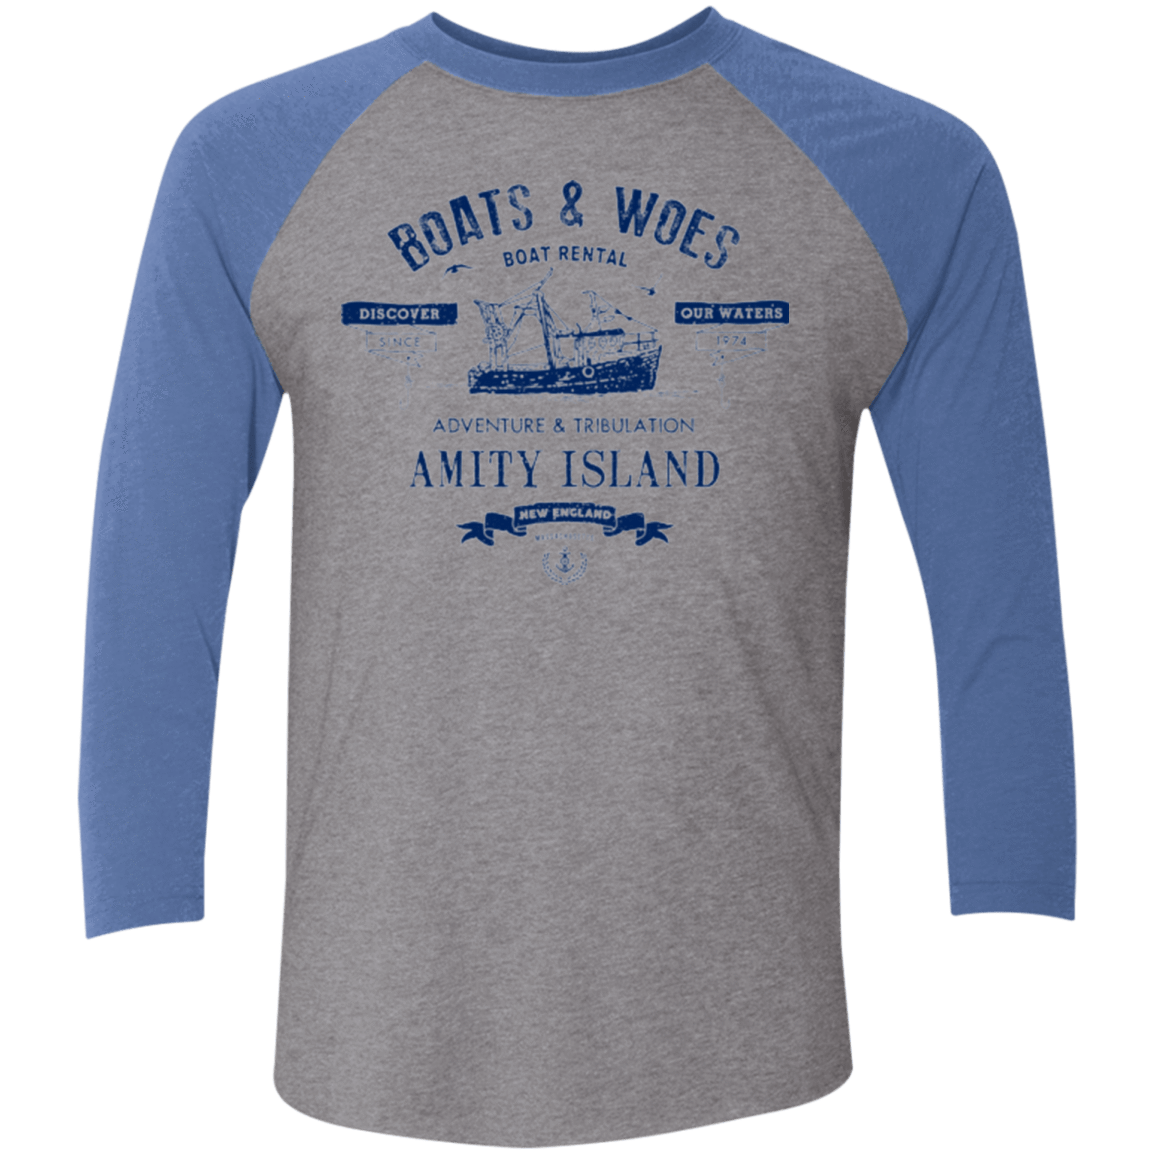 T-Shirts Premium Heather/ Vintage Royal / X-Small BOATS & WOES Men's Triblend 3/4 Sleeve